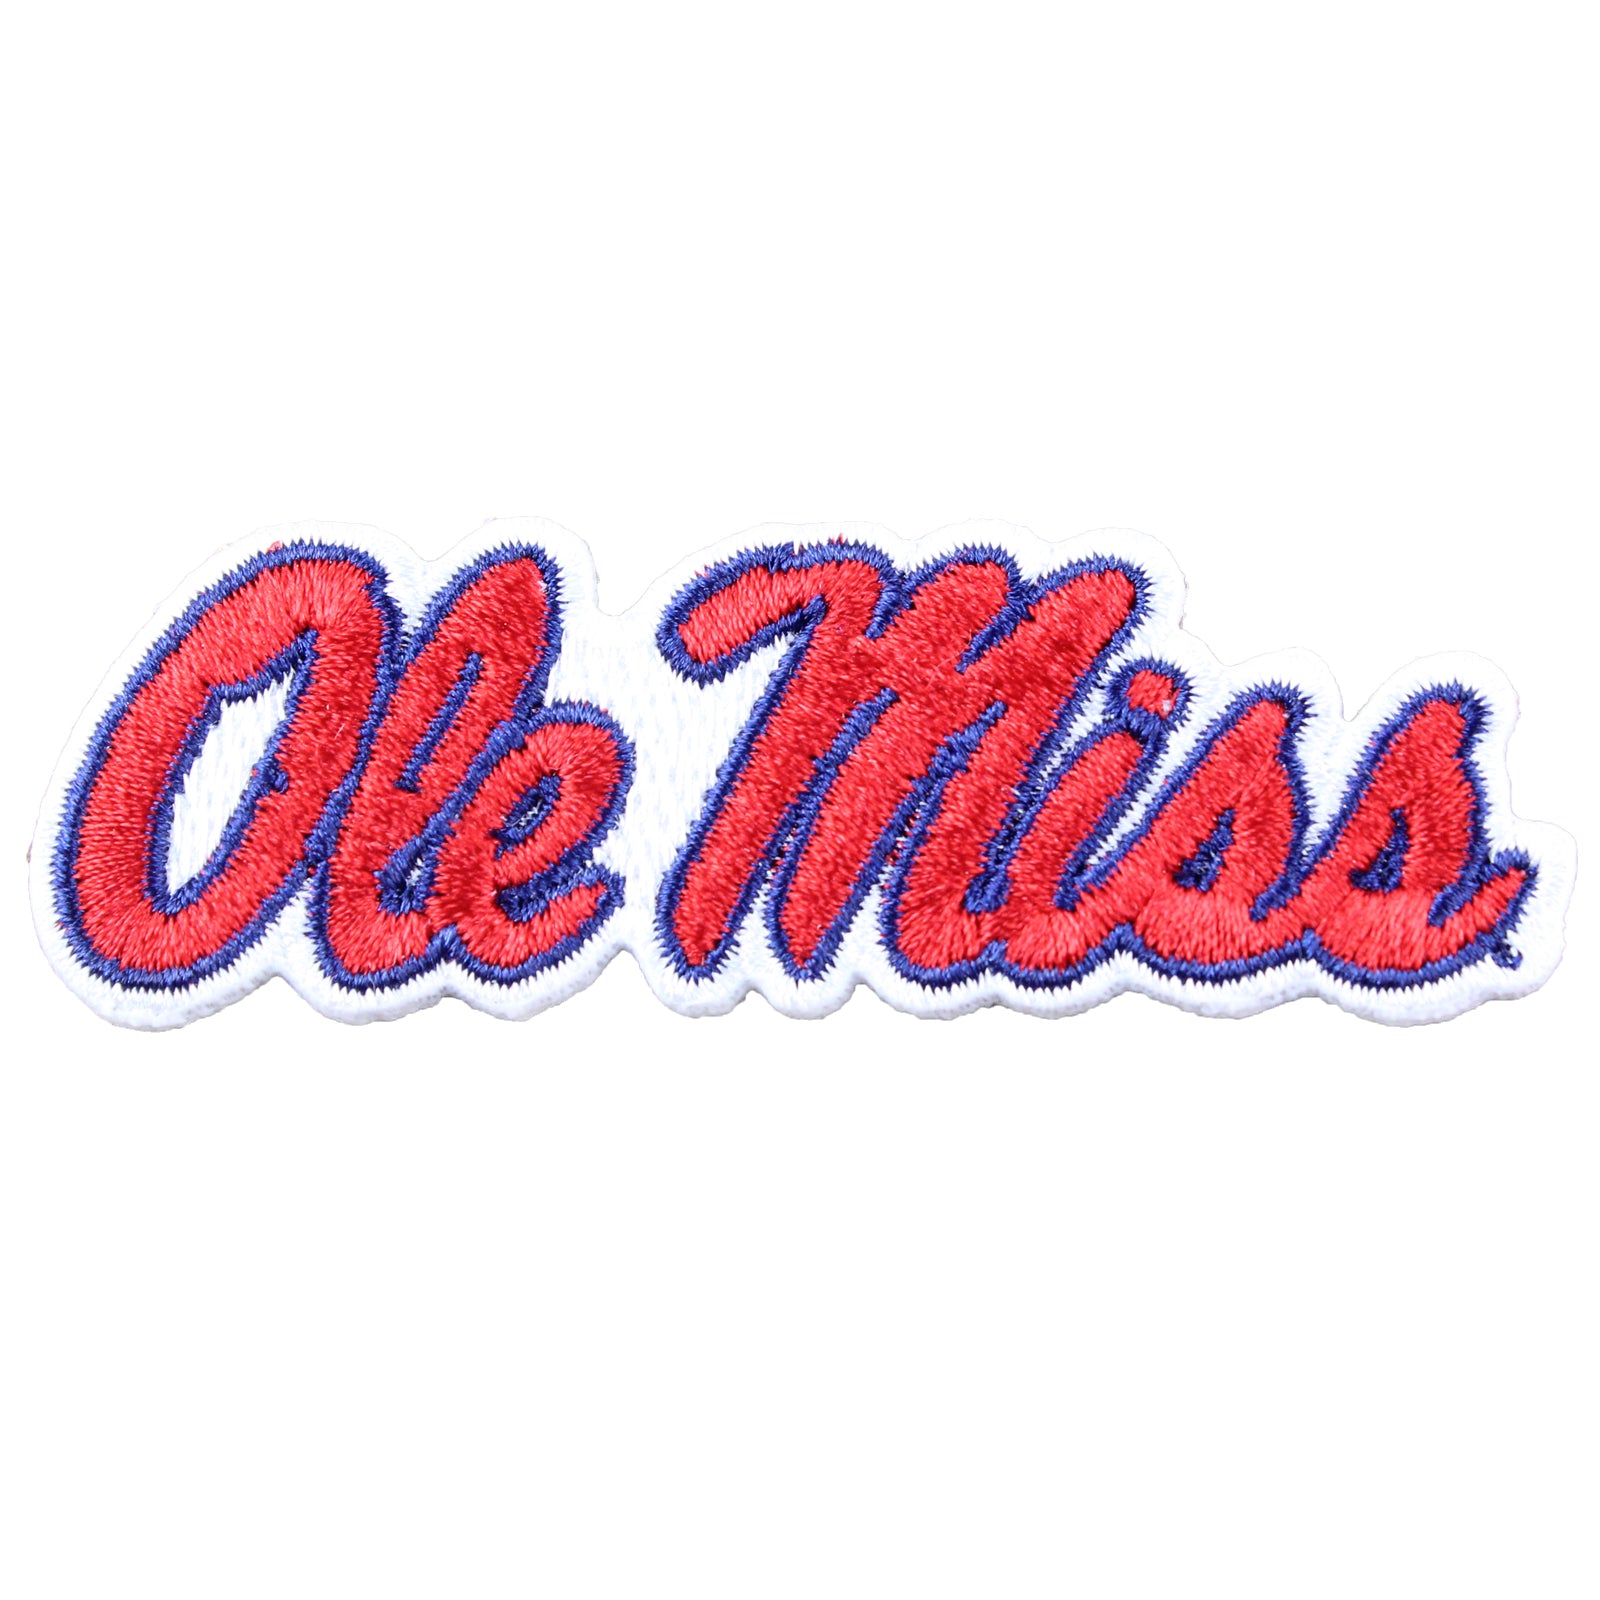 Ole Miss Rebels Logo Iron On Embroidered Patch 